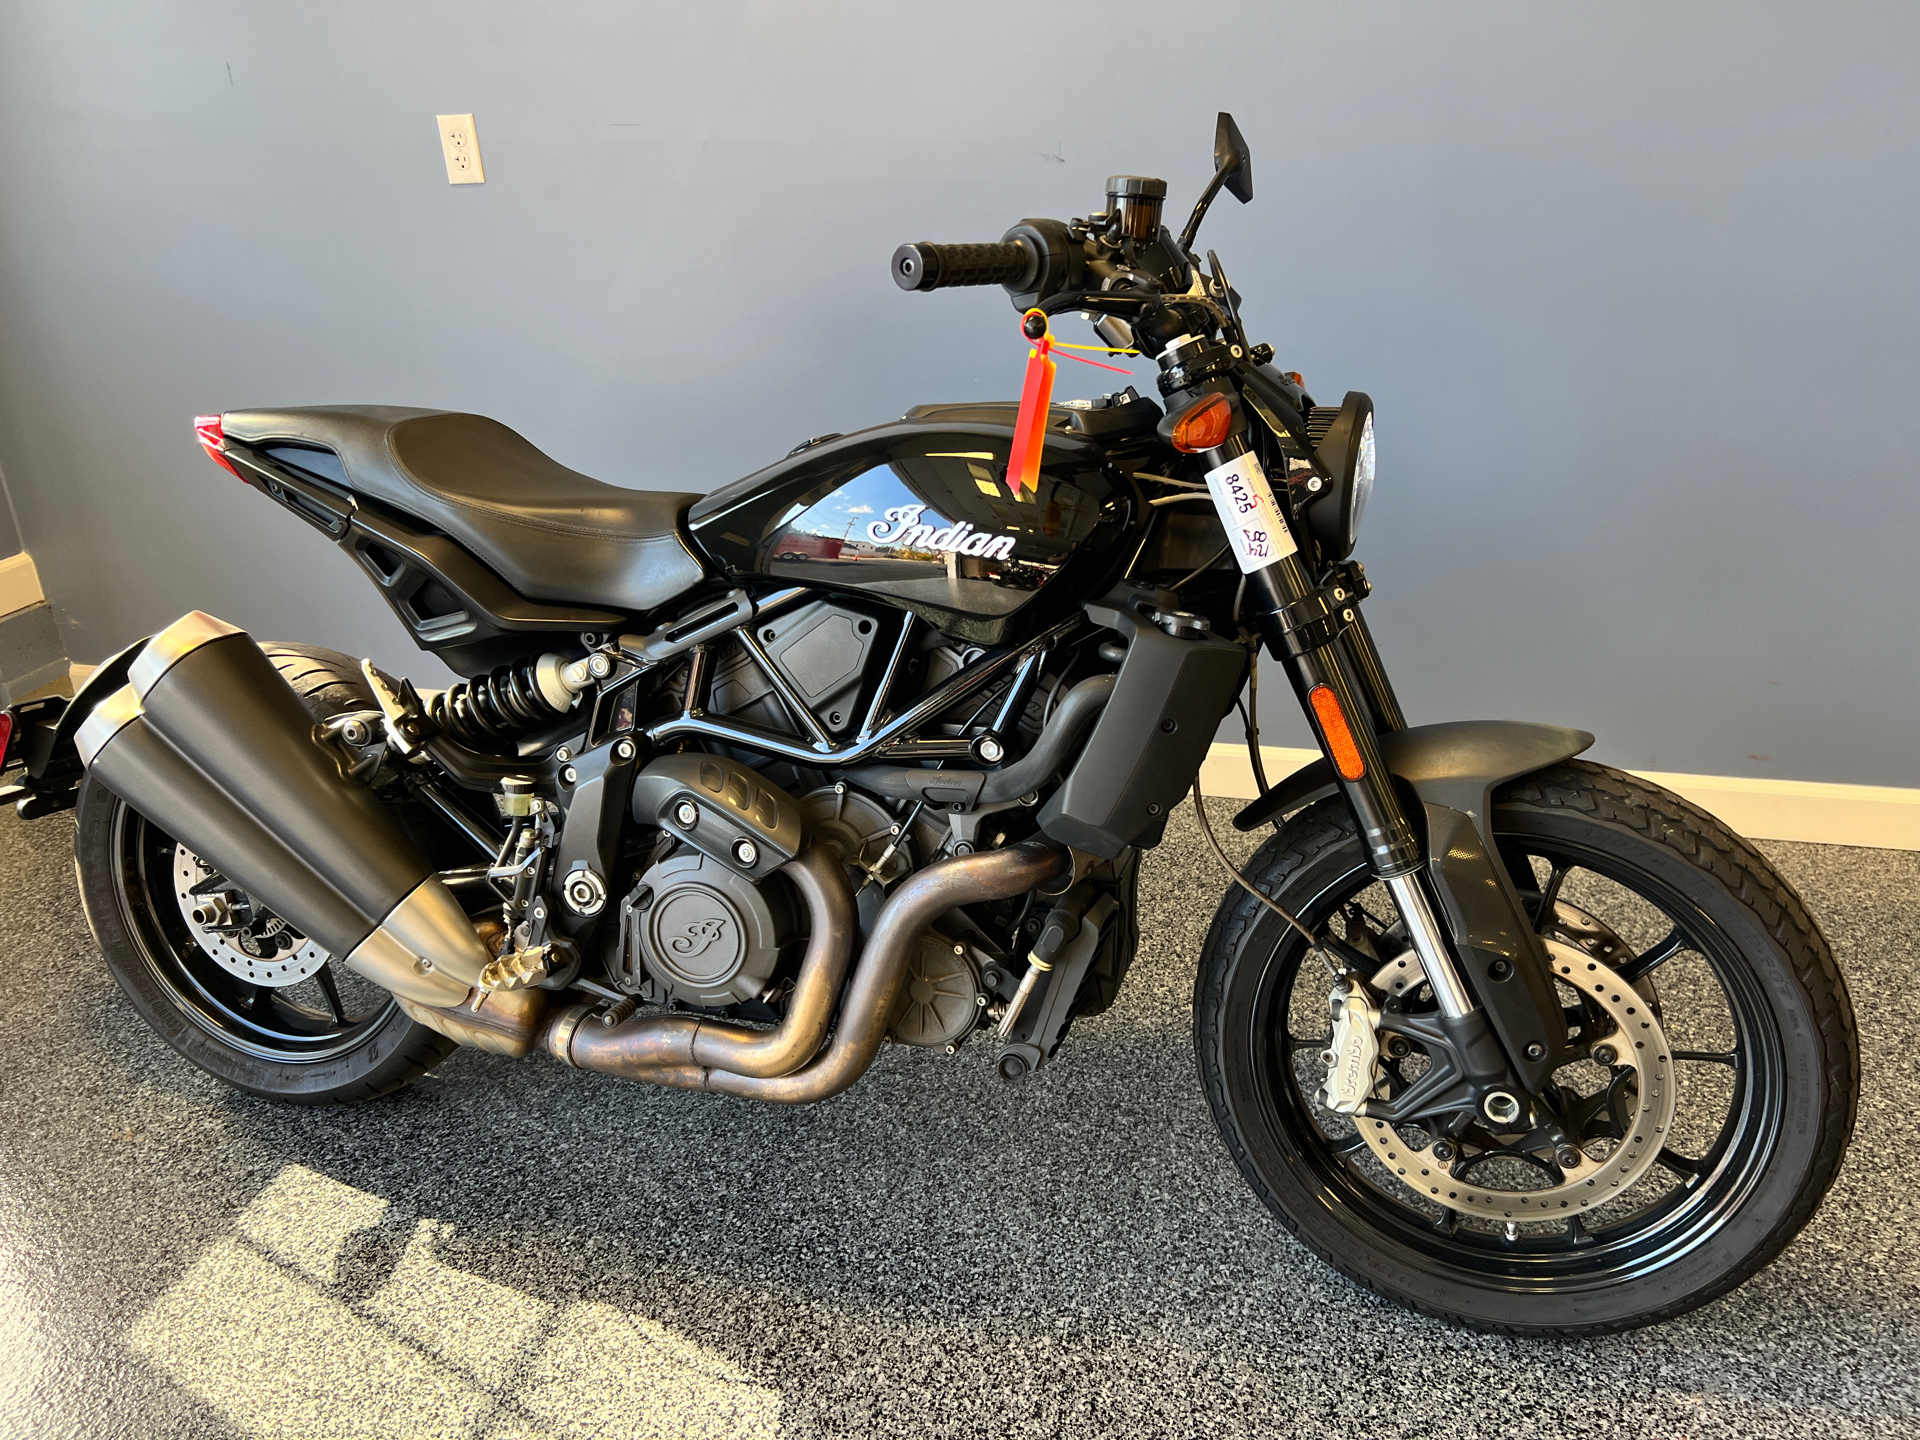 2019 Indian Motorcycle FTR™ 1200 in Meredith, New Hampshire - Photo 1